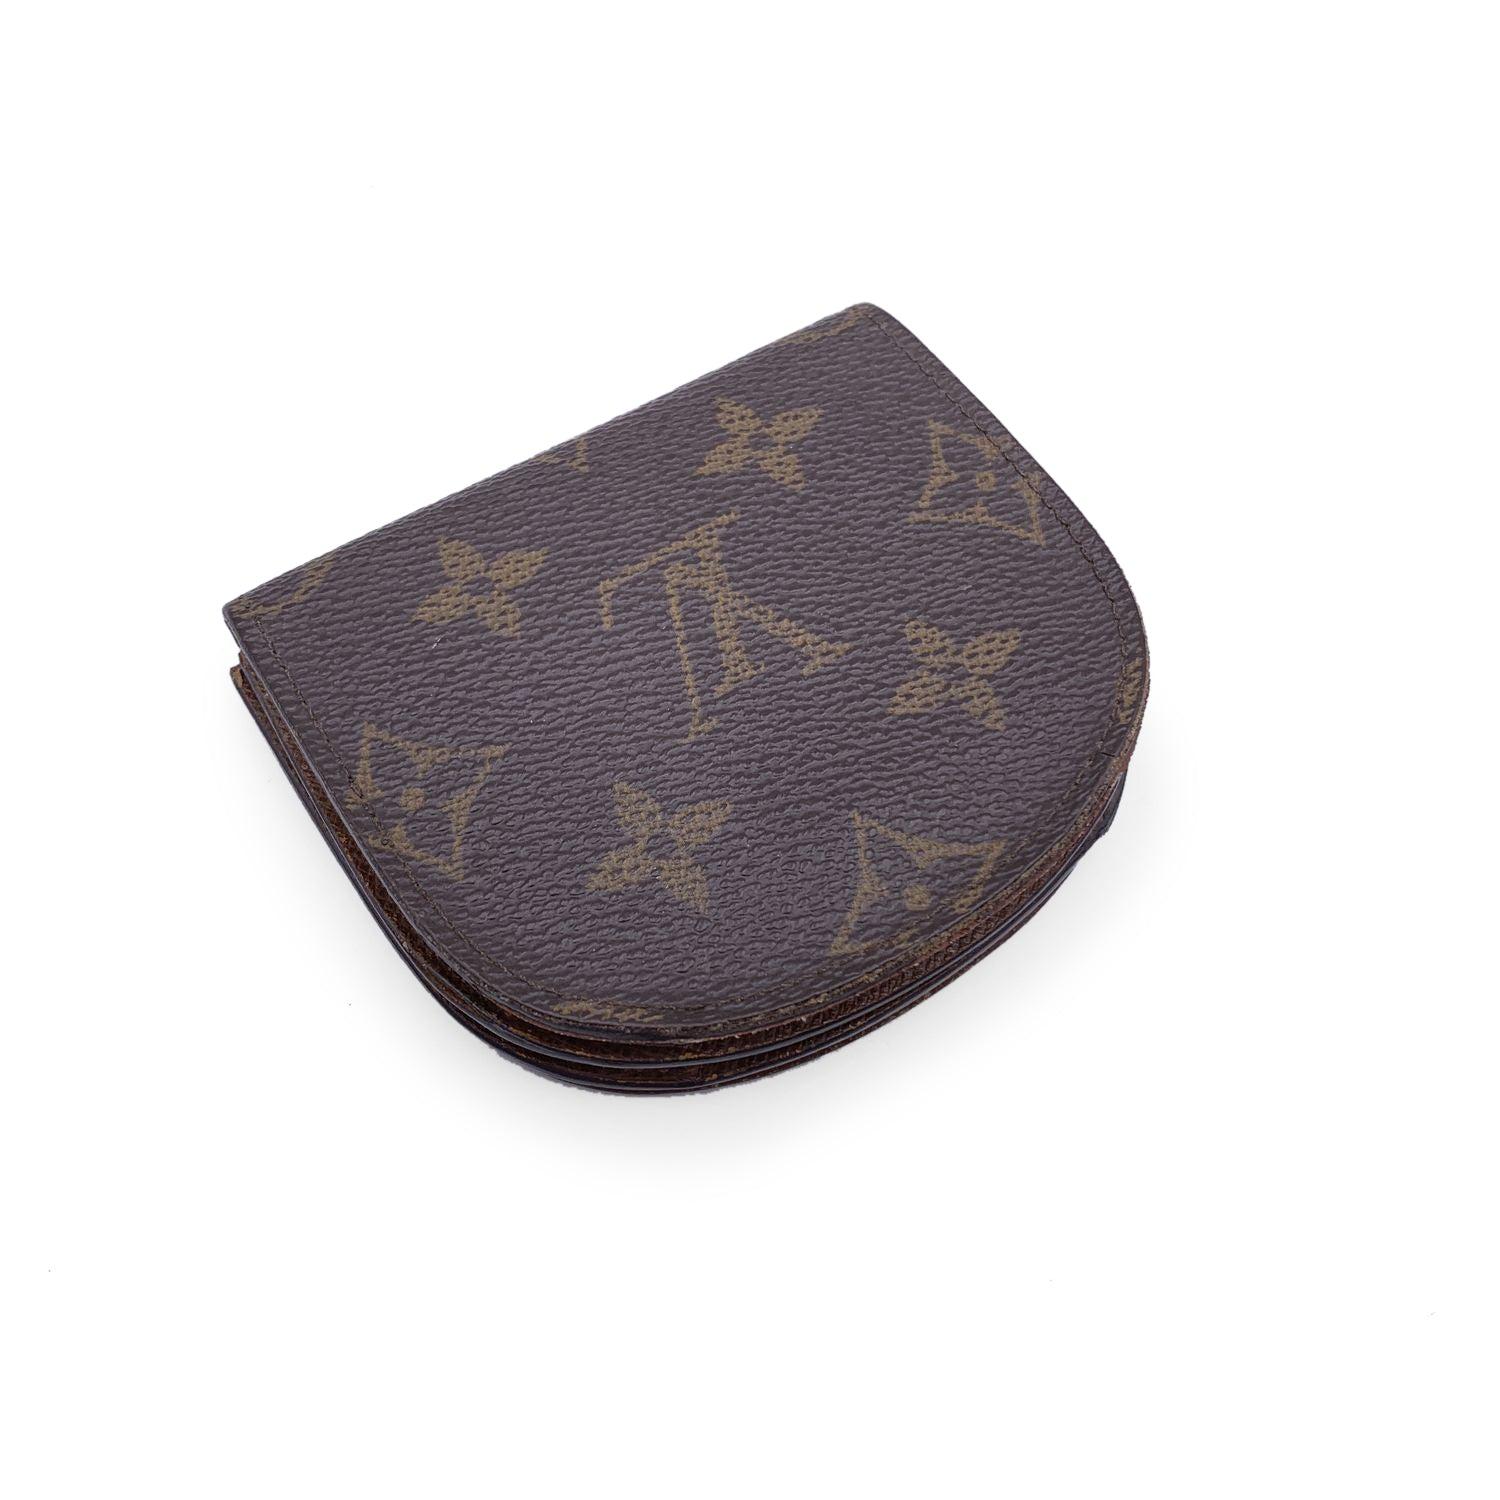 Louis Vuitton Vintage Monogram Canvas Change Coin Purse M61970 In Good Condition For Sale In Rome, Rome